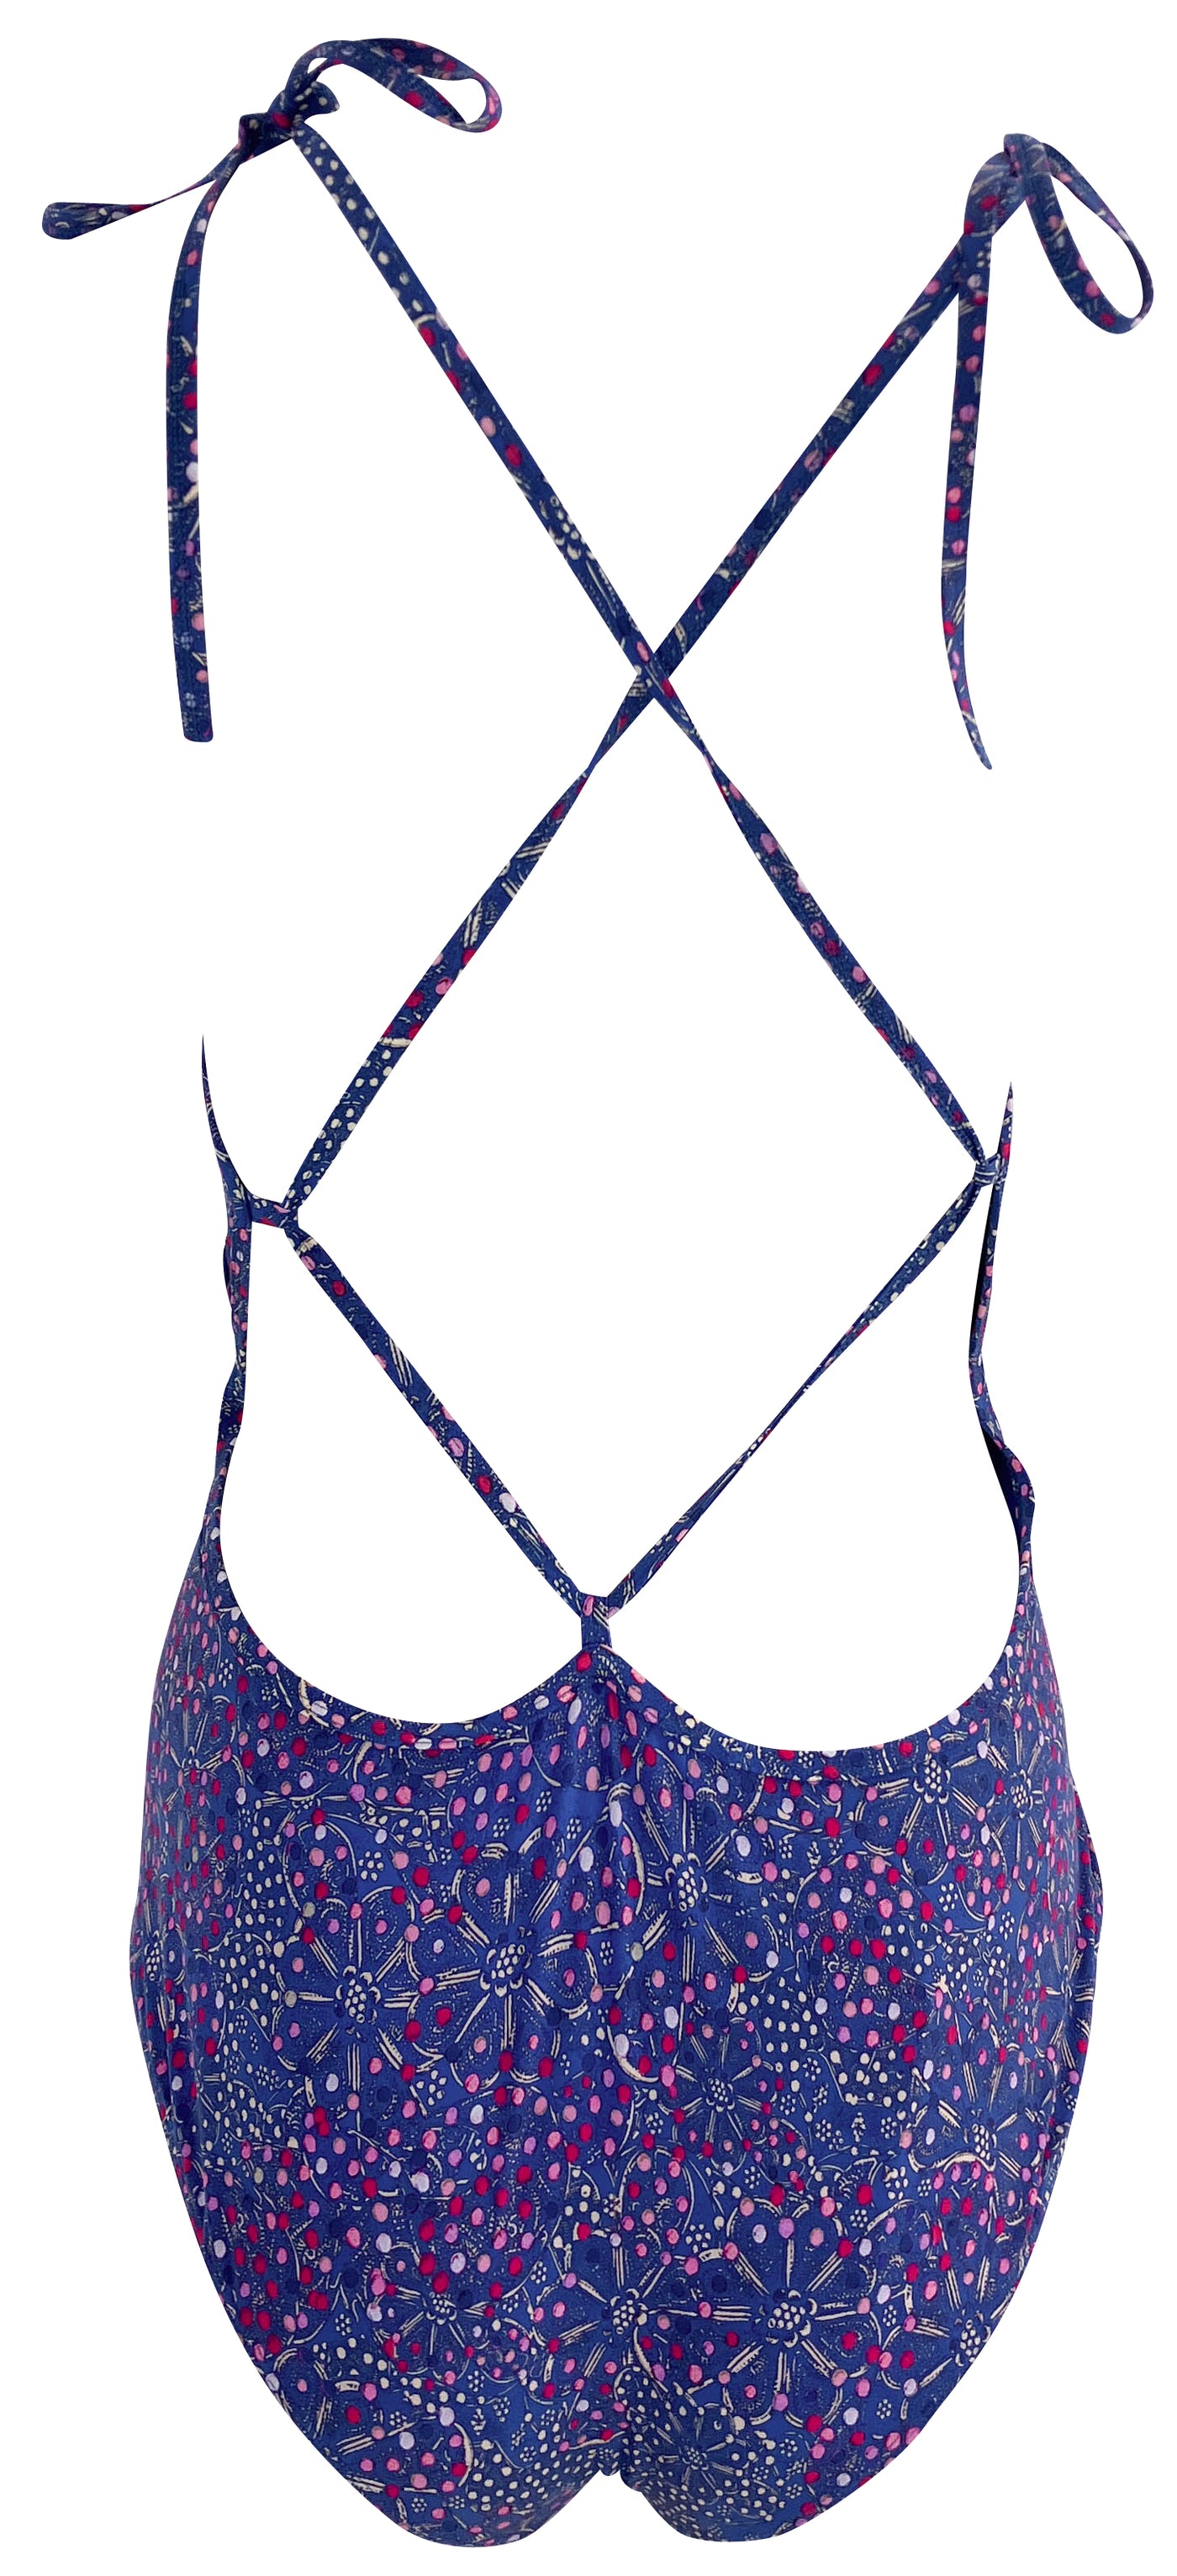 Isabel Marant Swan Swimsuit in Blue and Pink - Discounts on Isabel Marant at UAL